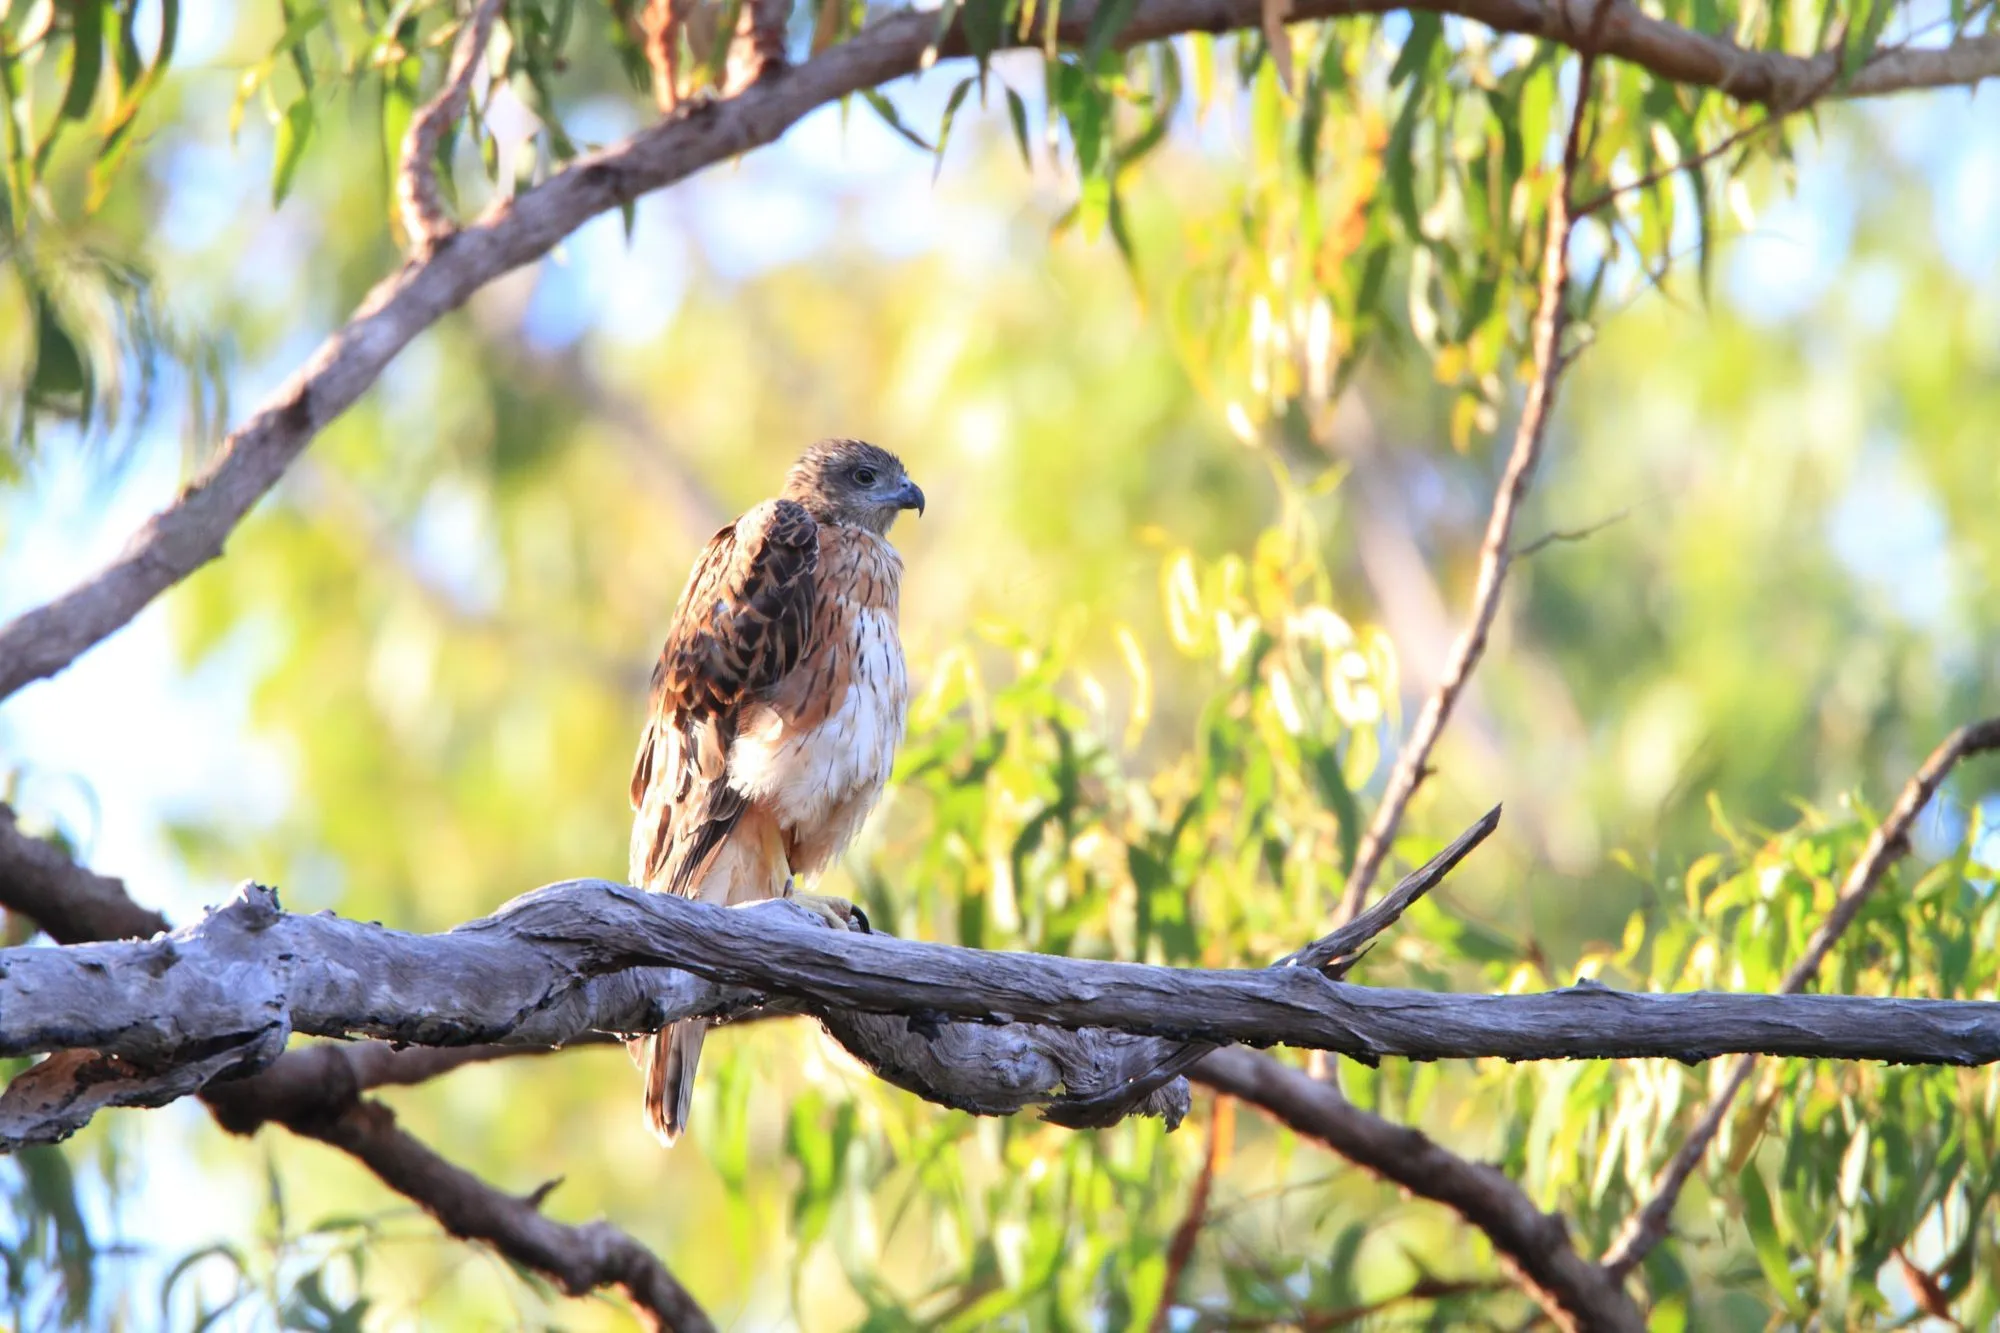 Red goshawk facts talk about this vulnerable species from Australia in detail.